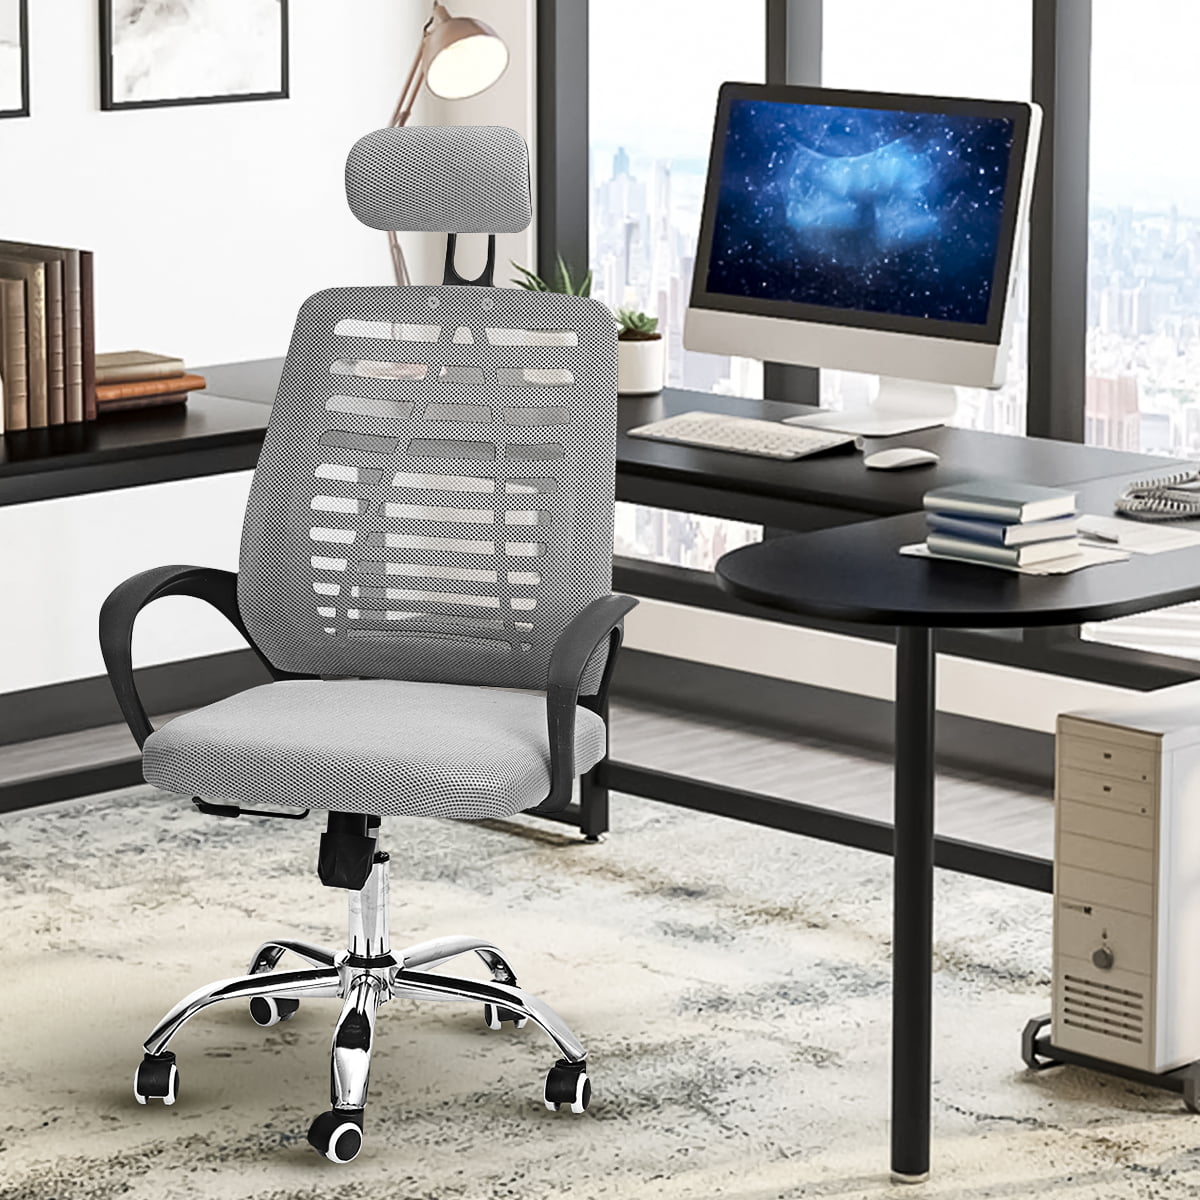 Details about   Office Chair Ergonomic Computer Task Desk Chair Mid Back Height Swivel Mesh Seat 